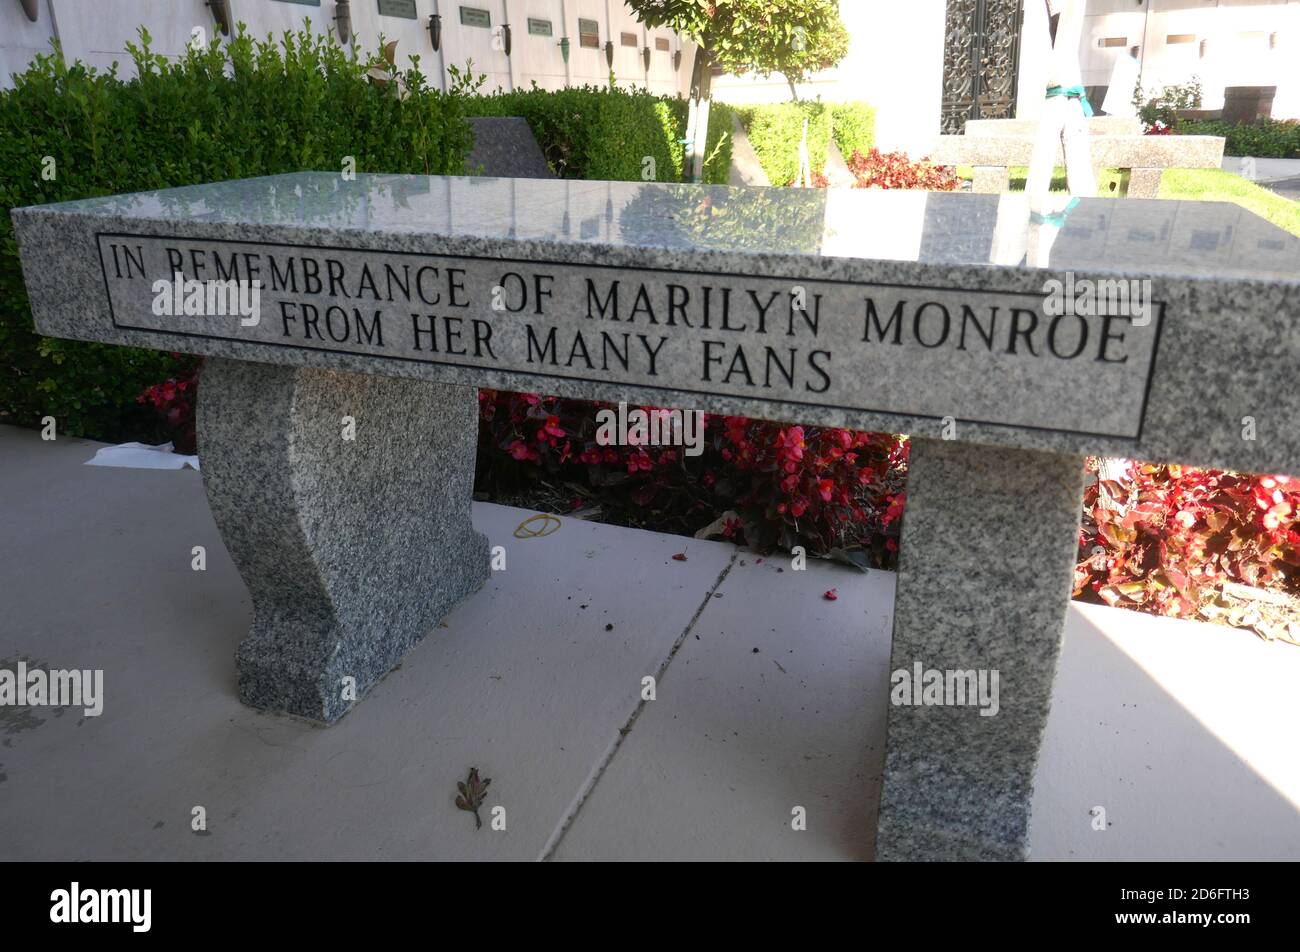 The other side of L.A.: Westwood, movies and Marilyn Monroe